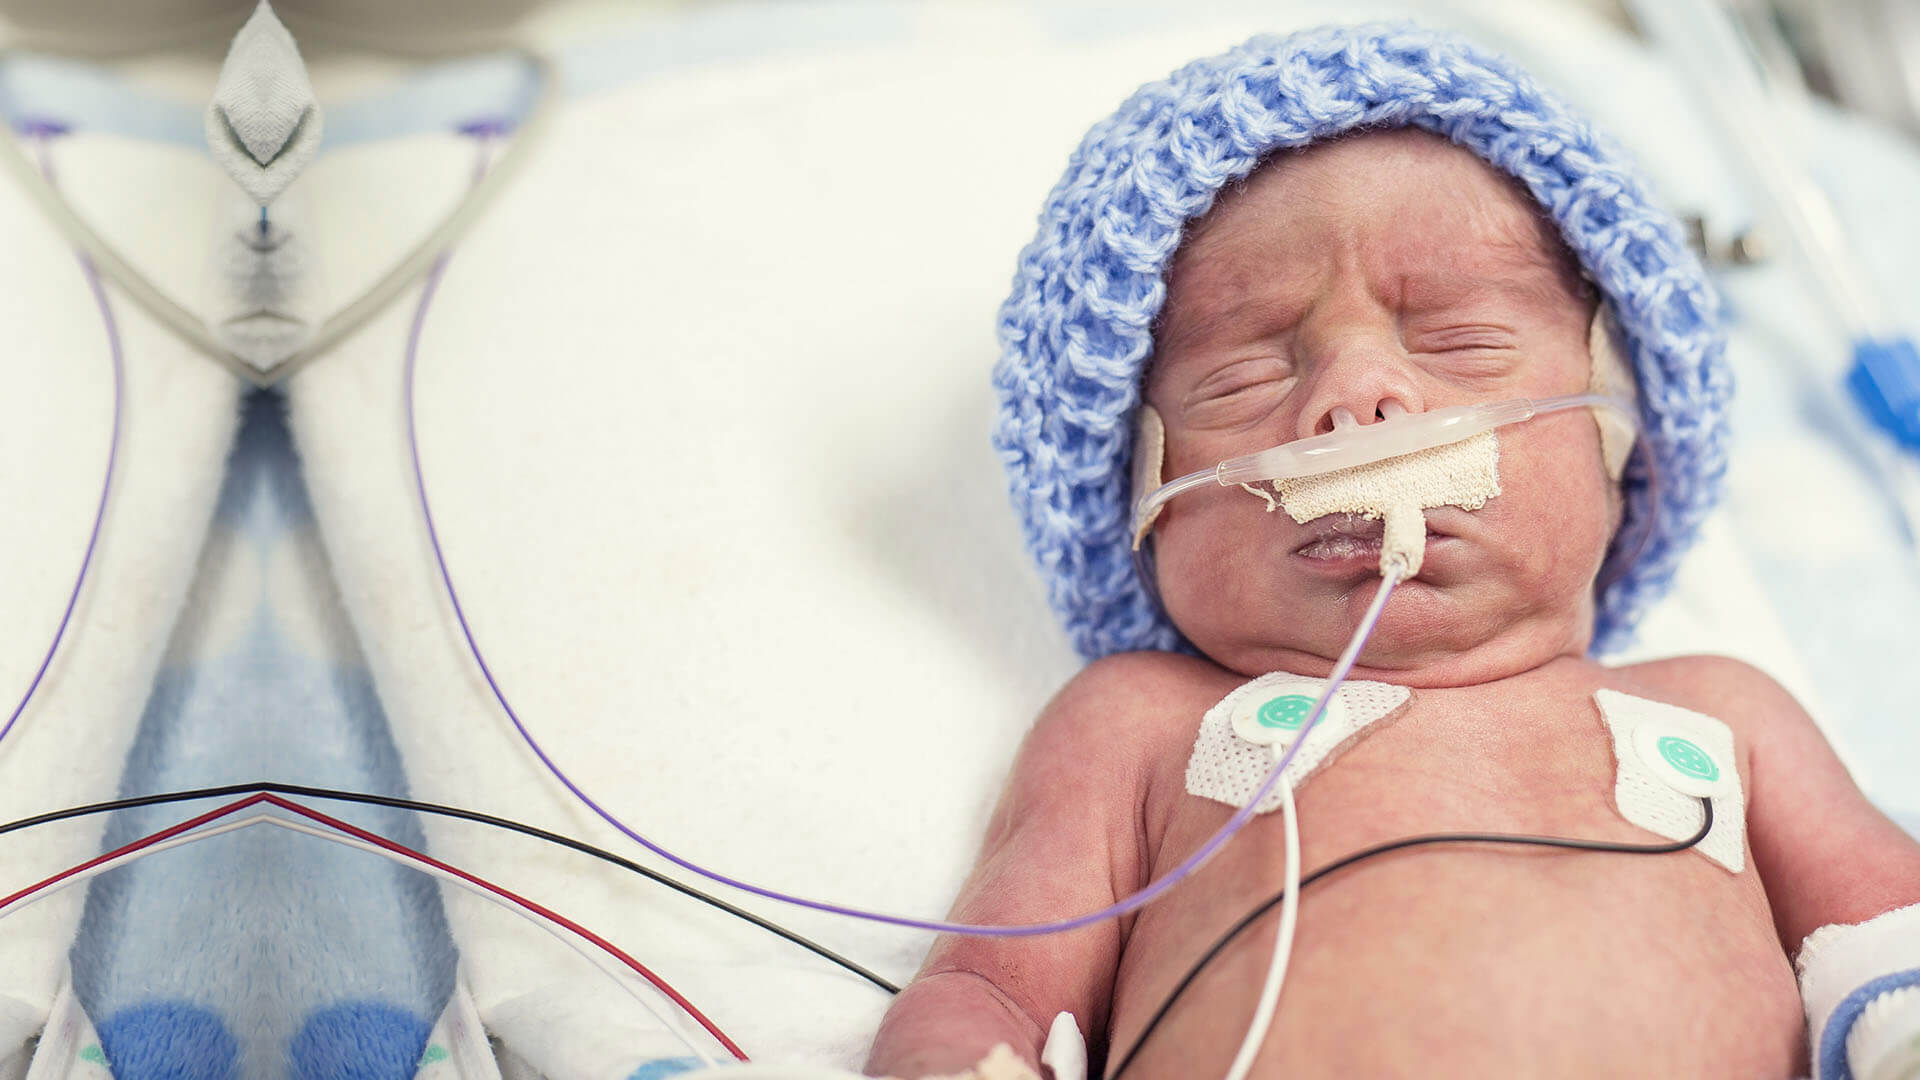 A newborn baby in the NICU with a breathing tube after a birth injury